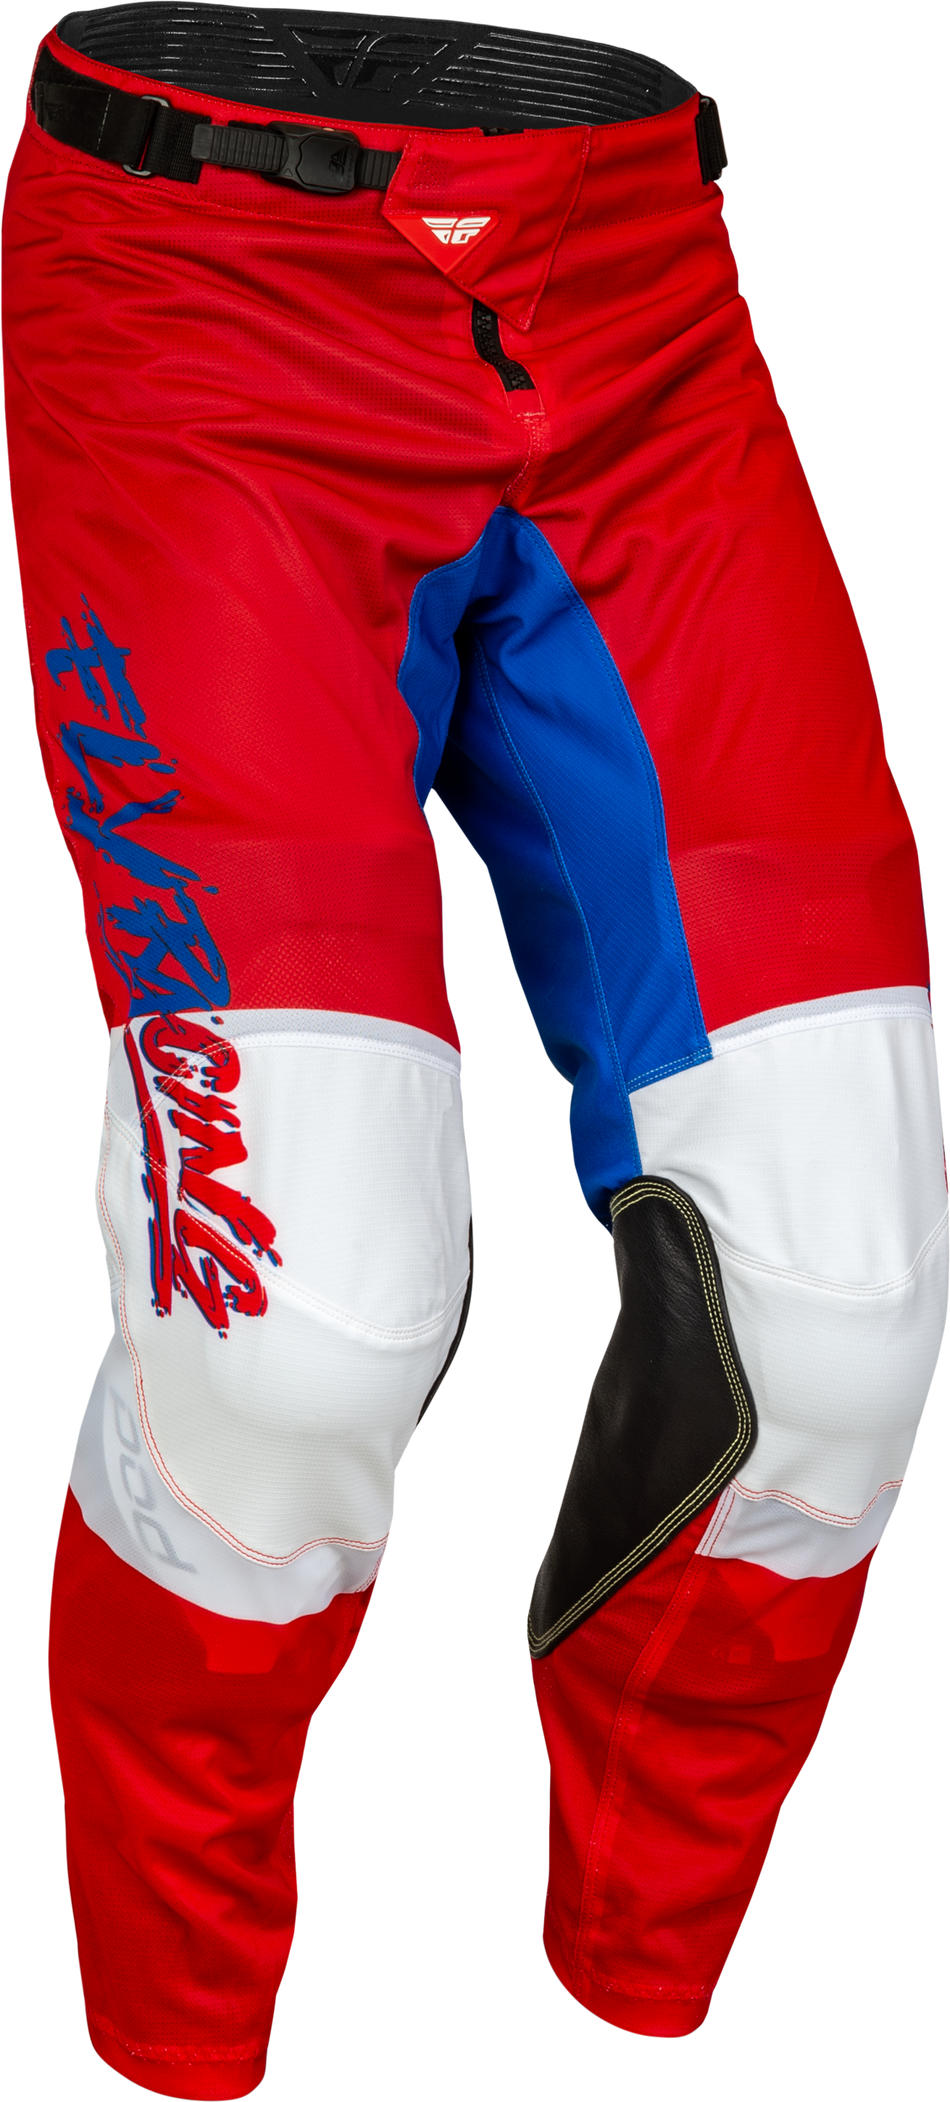 FLY RACING Youth Kinetic Mesh Khaos Pants Red/White/Blue Sz 24 377-34424